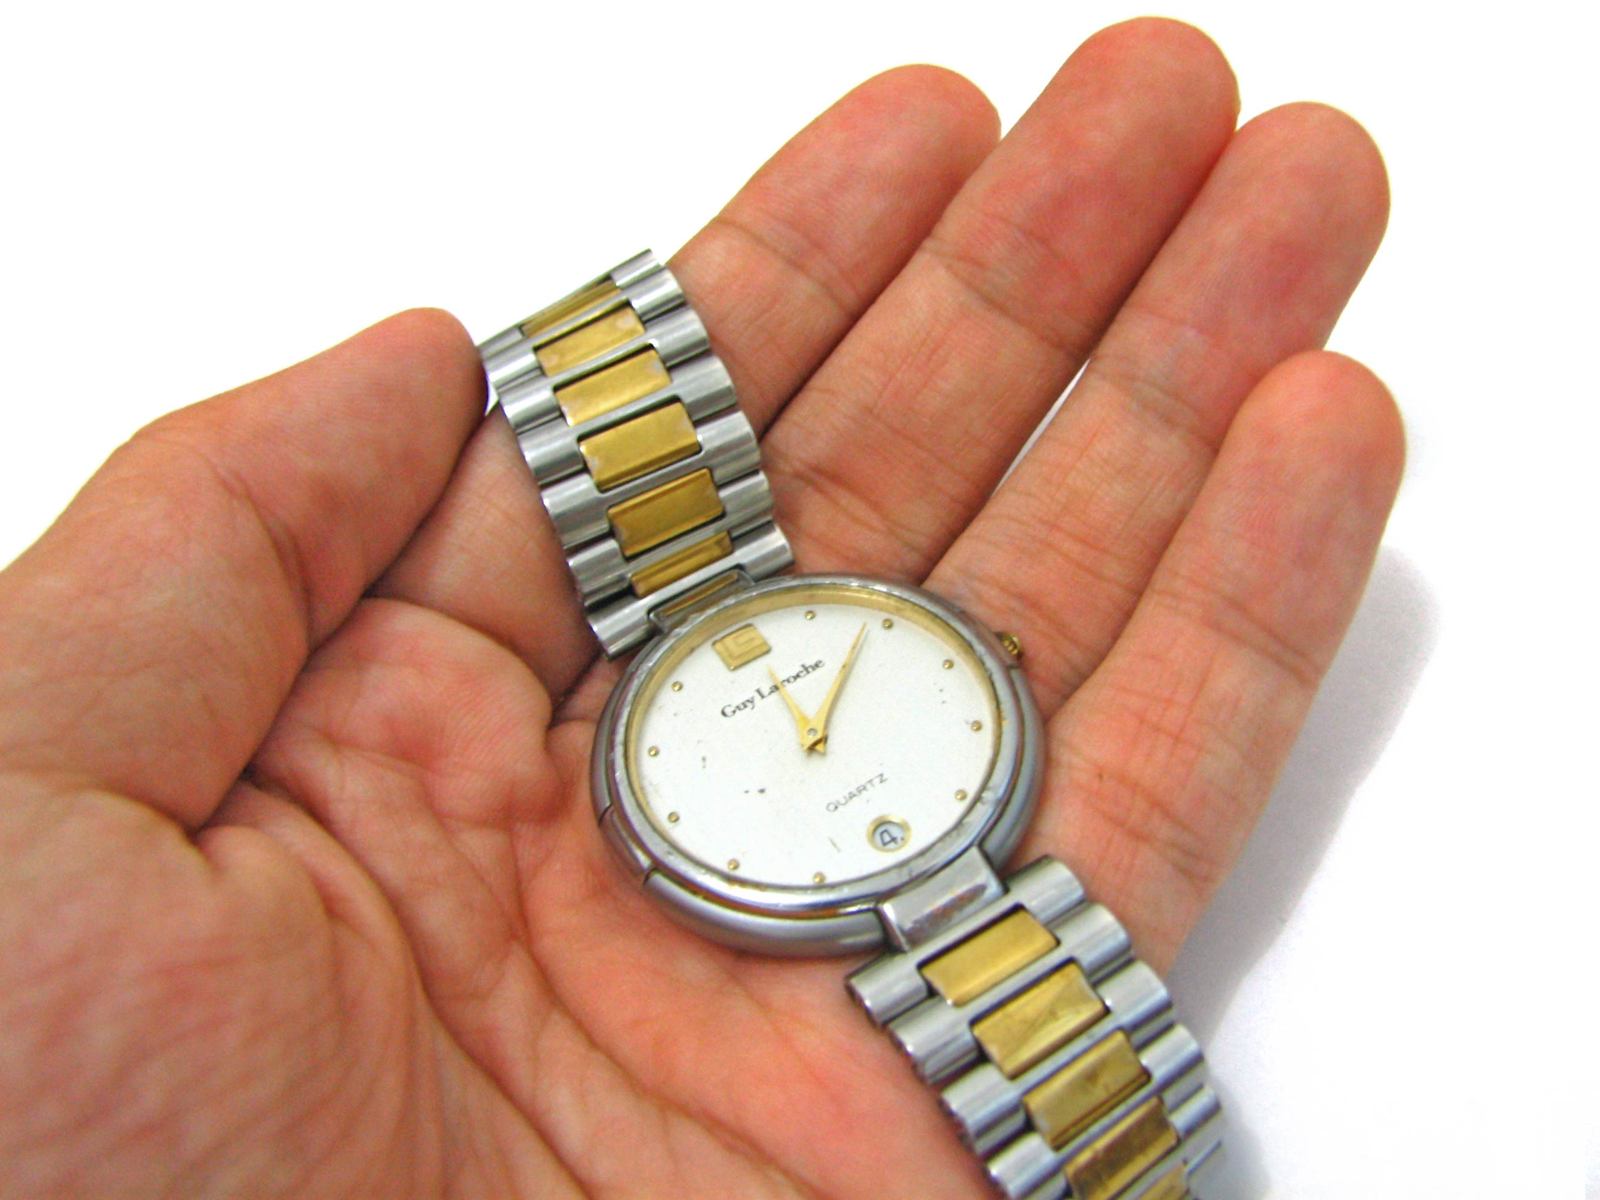 a man is holding a watch in his hands